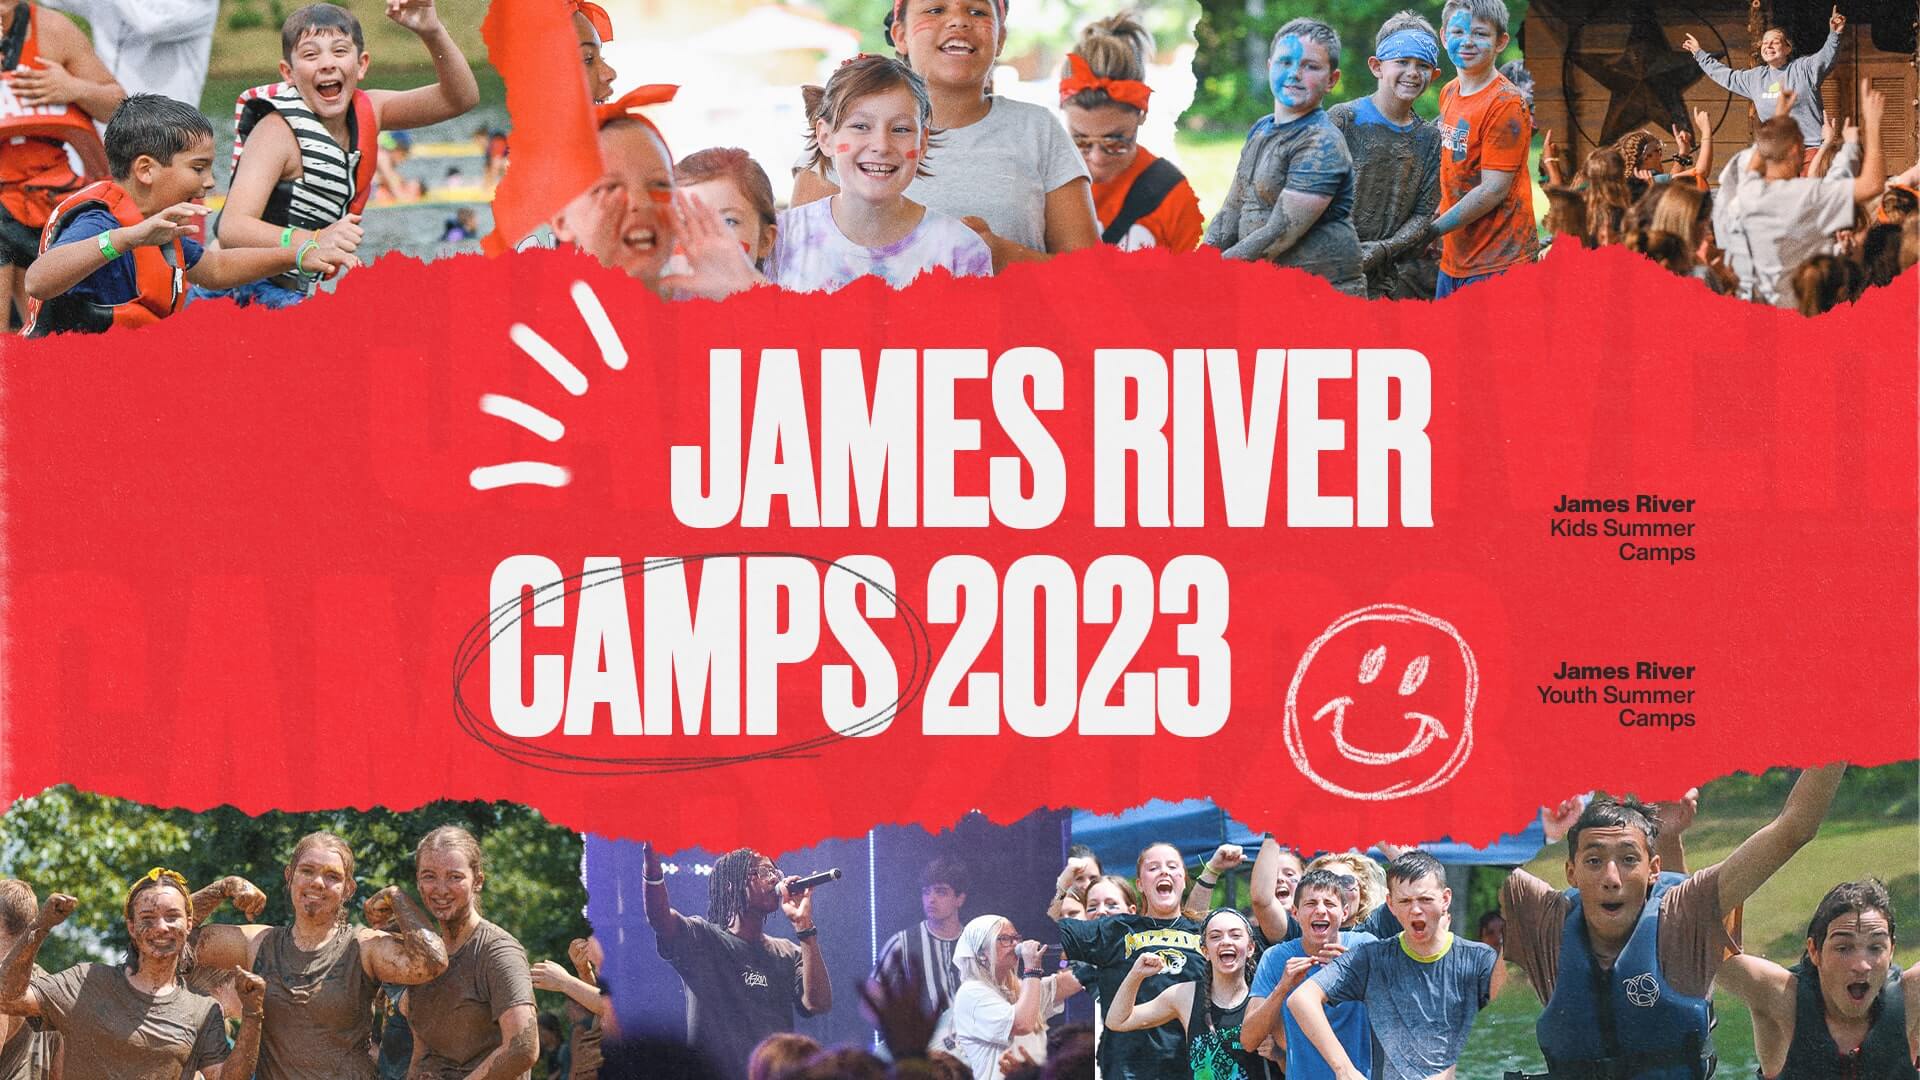 Christian Youth & Kids Summer Camps in Missouri